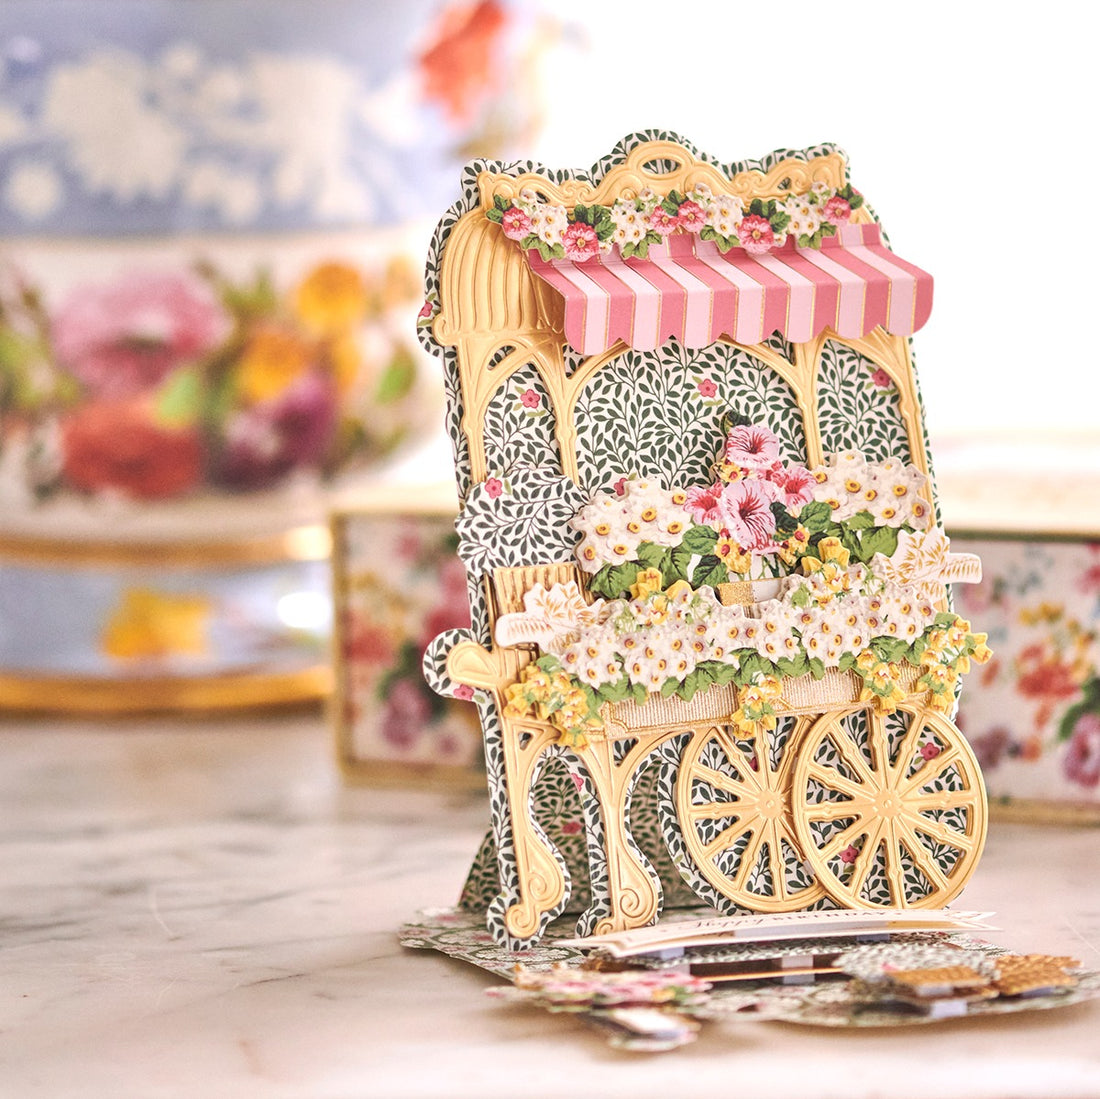 a close up of a toy horse drawn carriage.